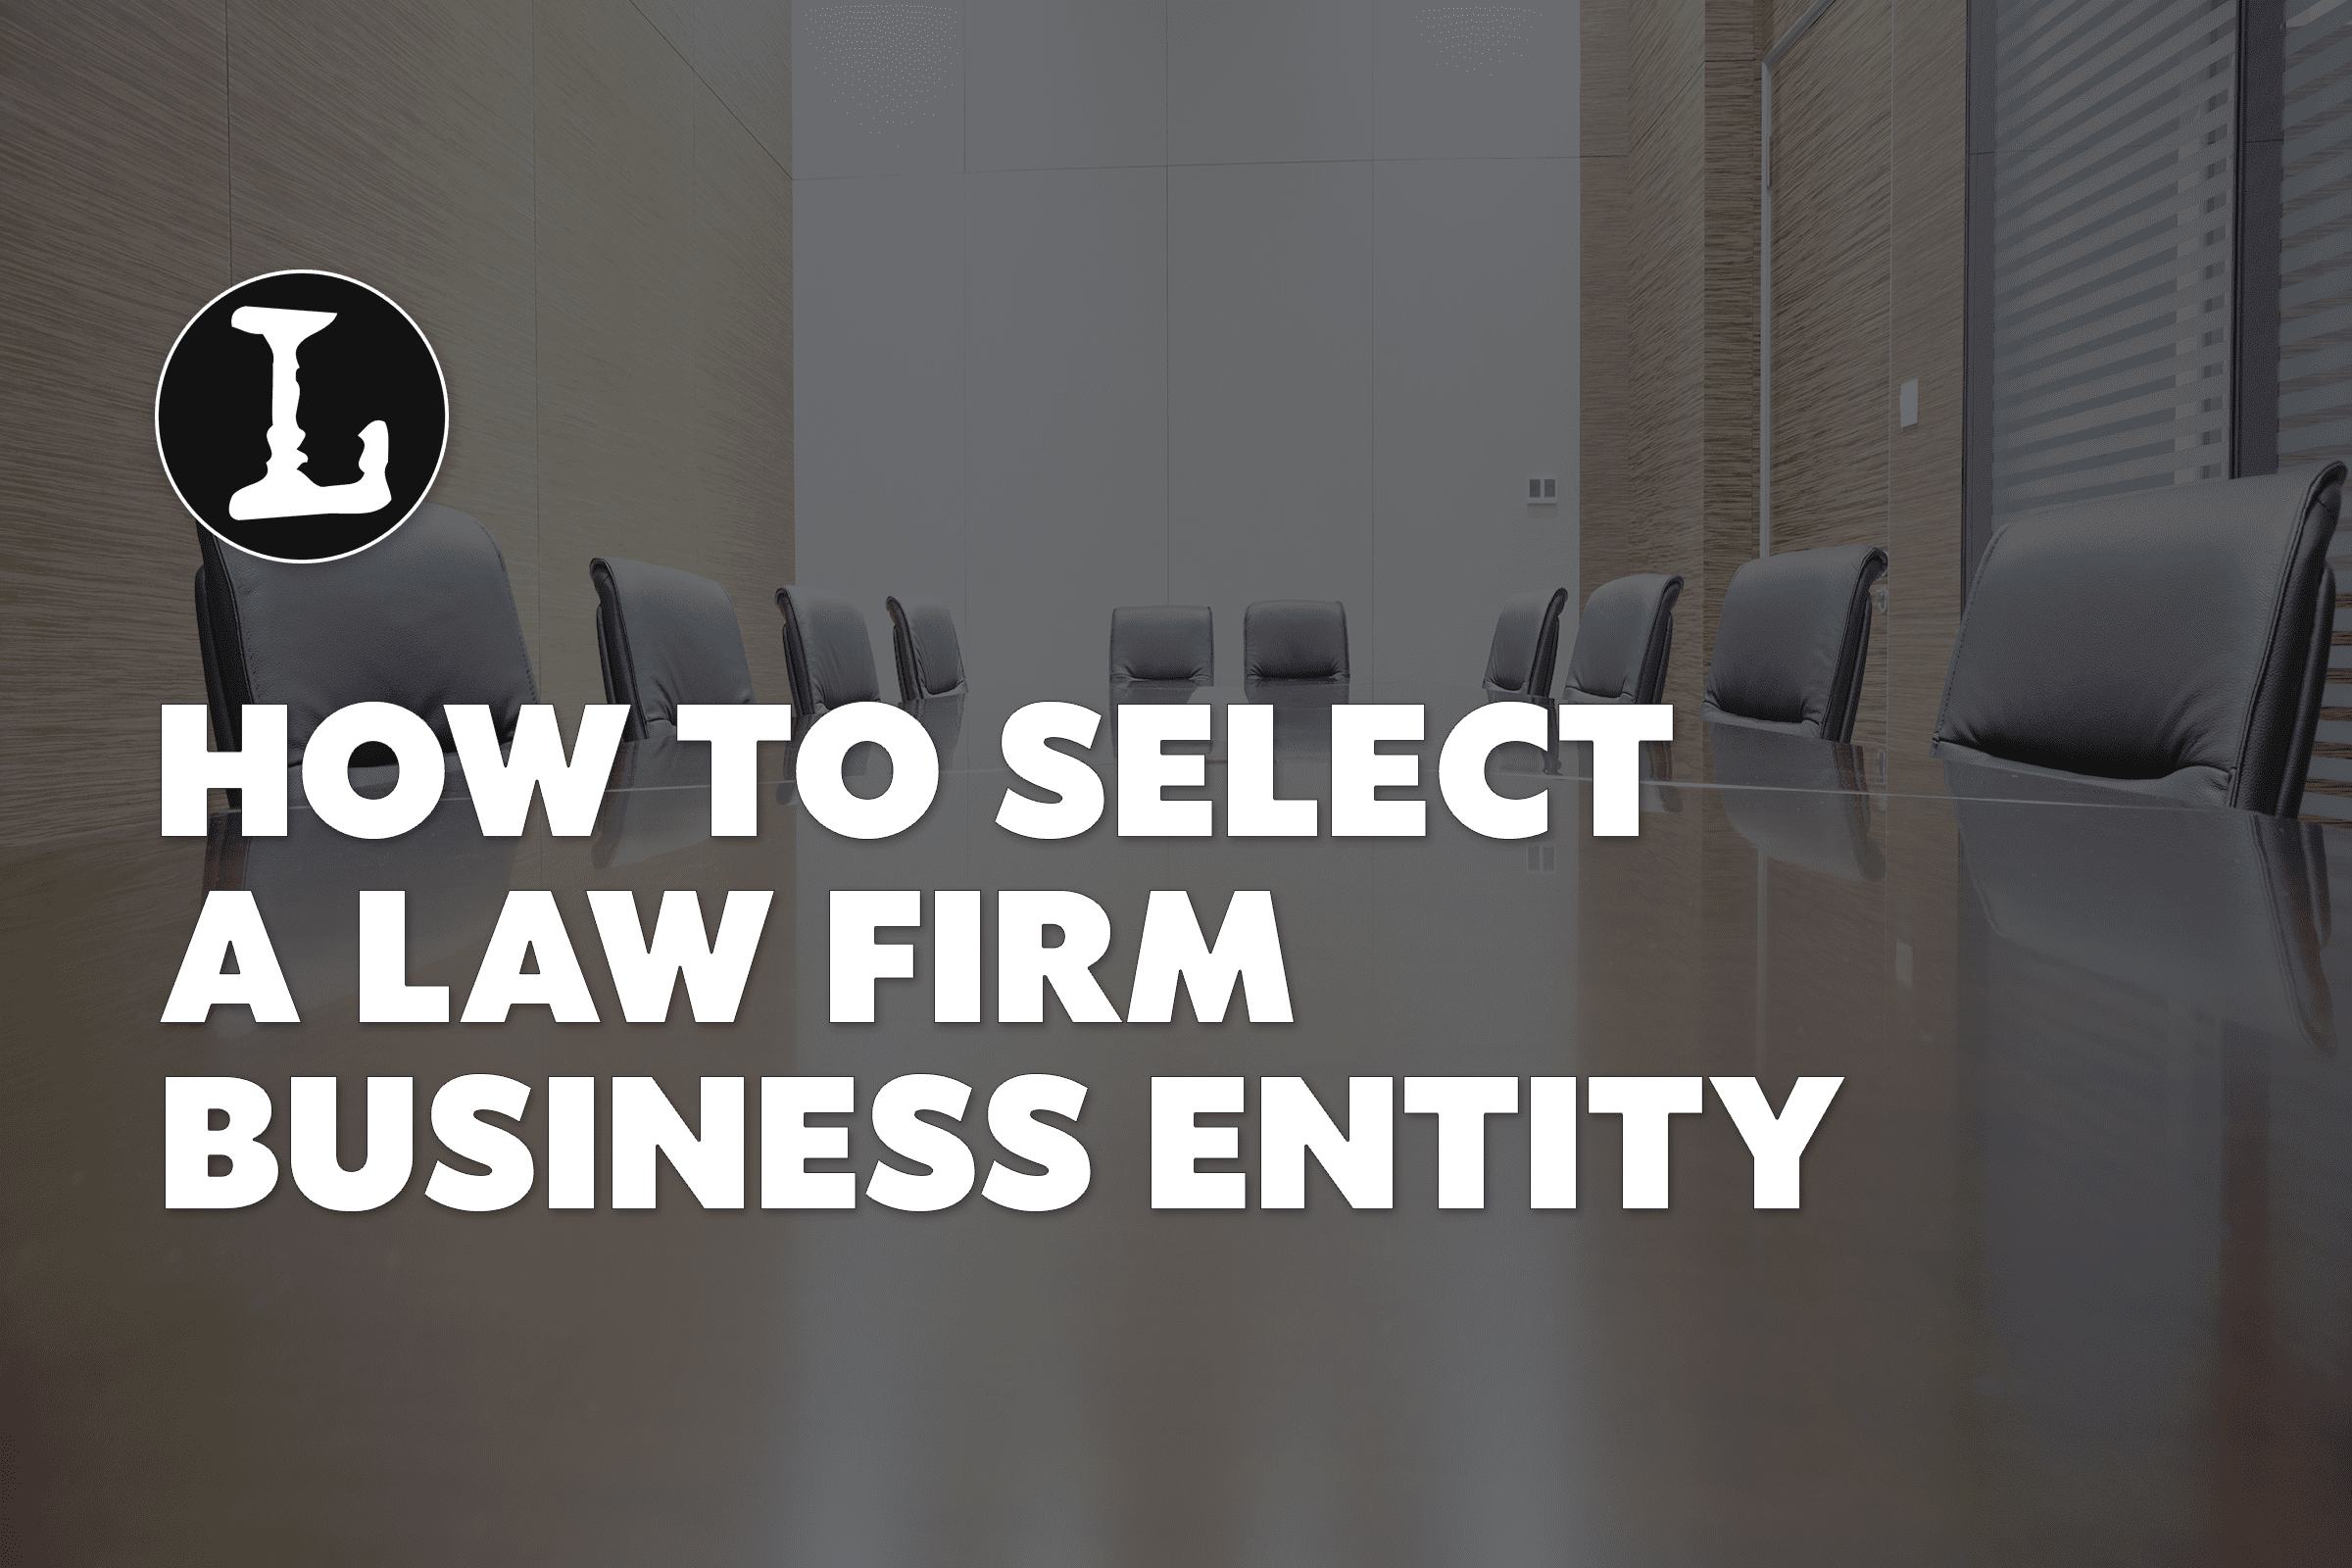 How to Select a Law Firm Business Entity featured image